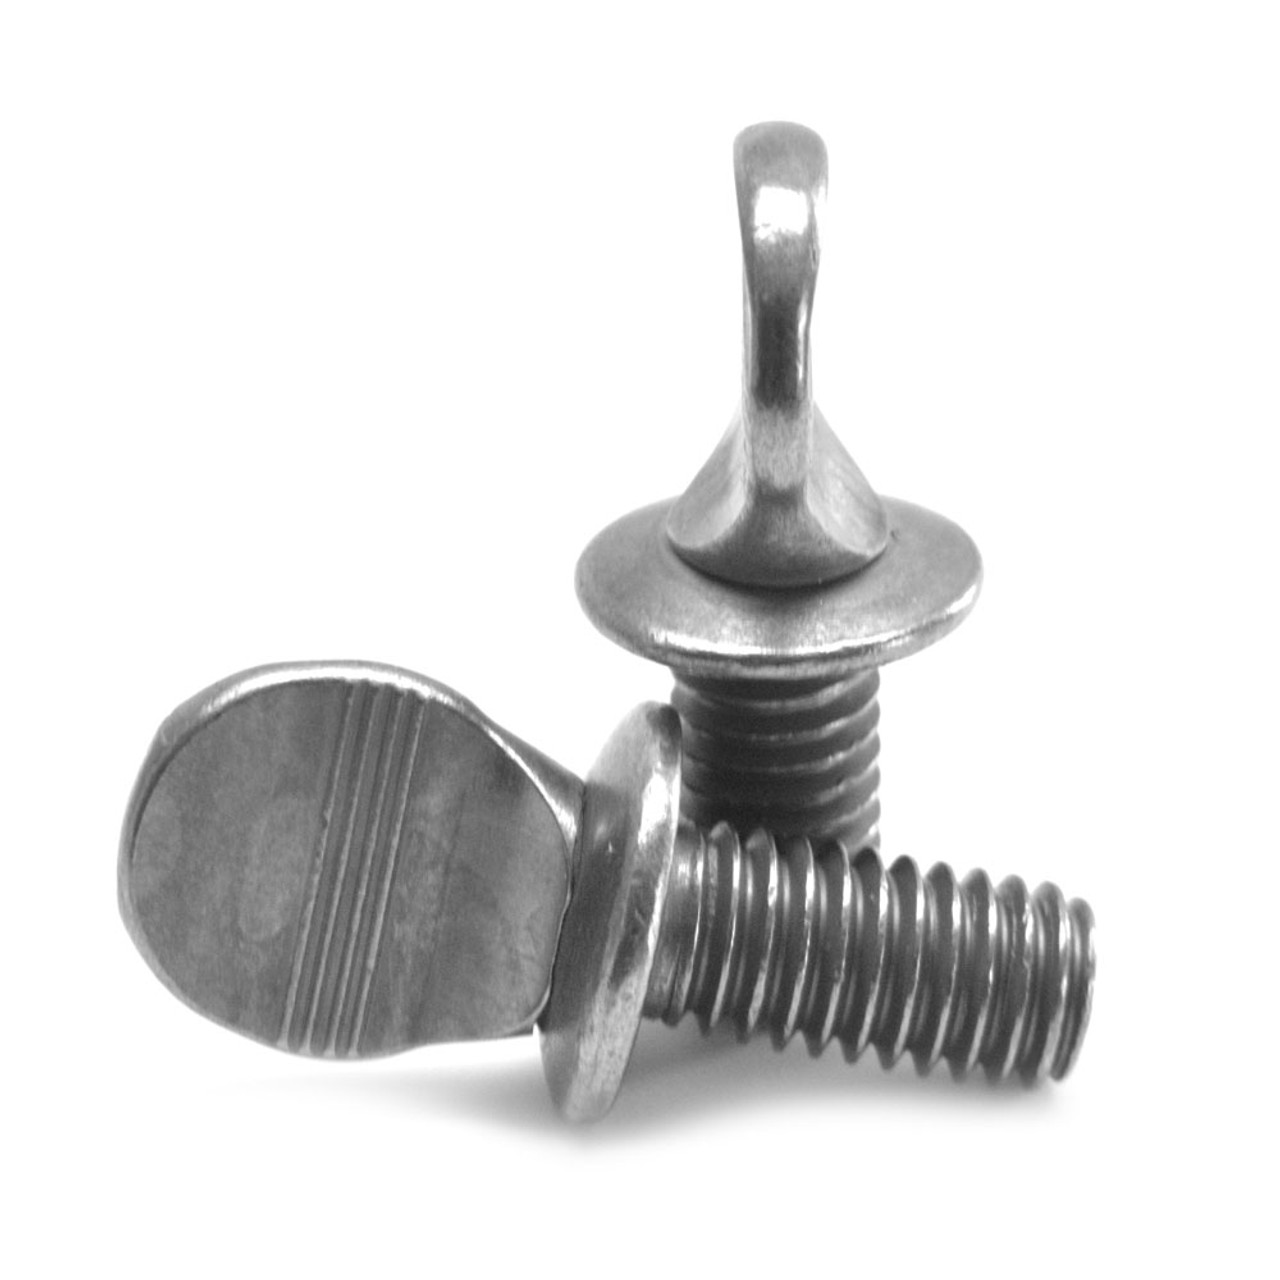 1/4-20 x 1 1/4 Coarse Thread Thumb Screw Type A With Shoulder Low Carbon Steel Plain Finish